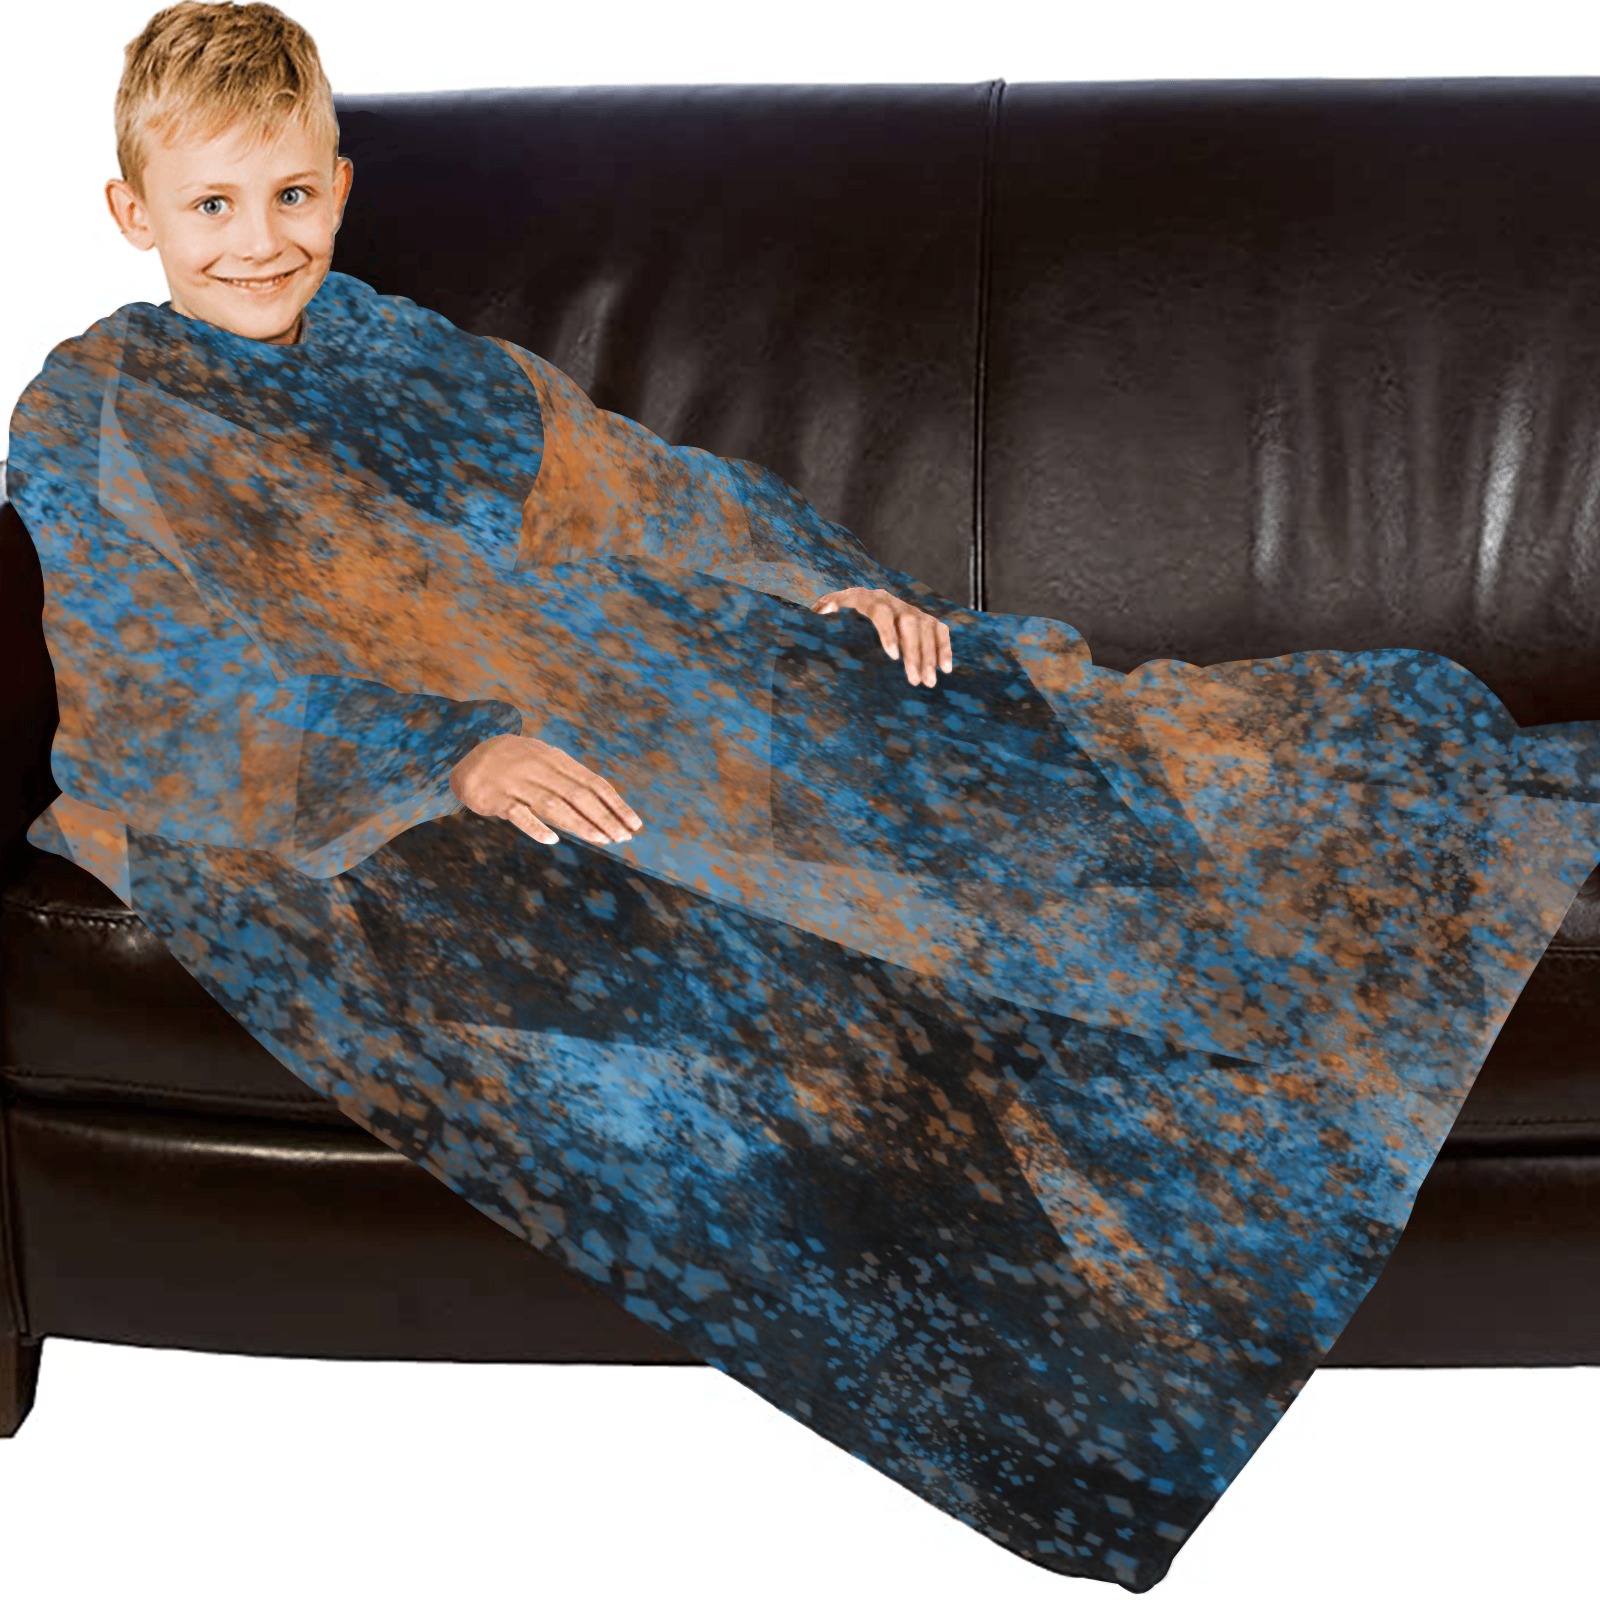 RusticTomorrow Blanket Robe with Sleeves for Kids